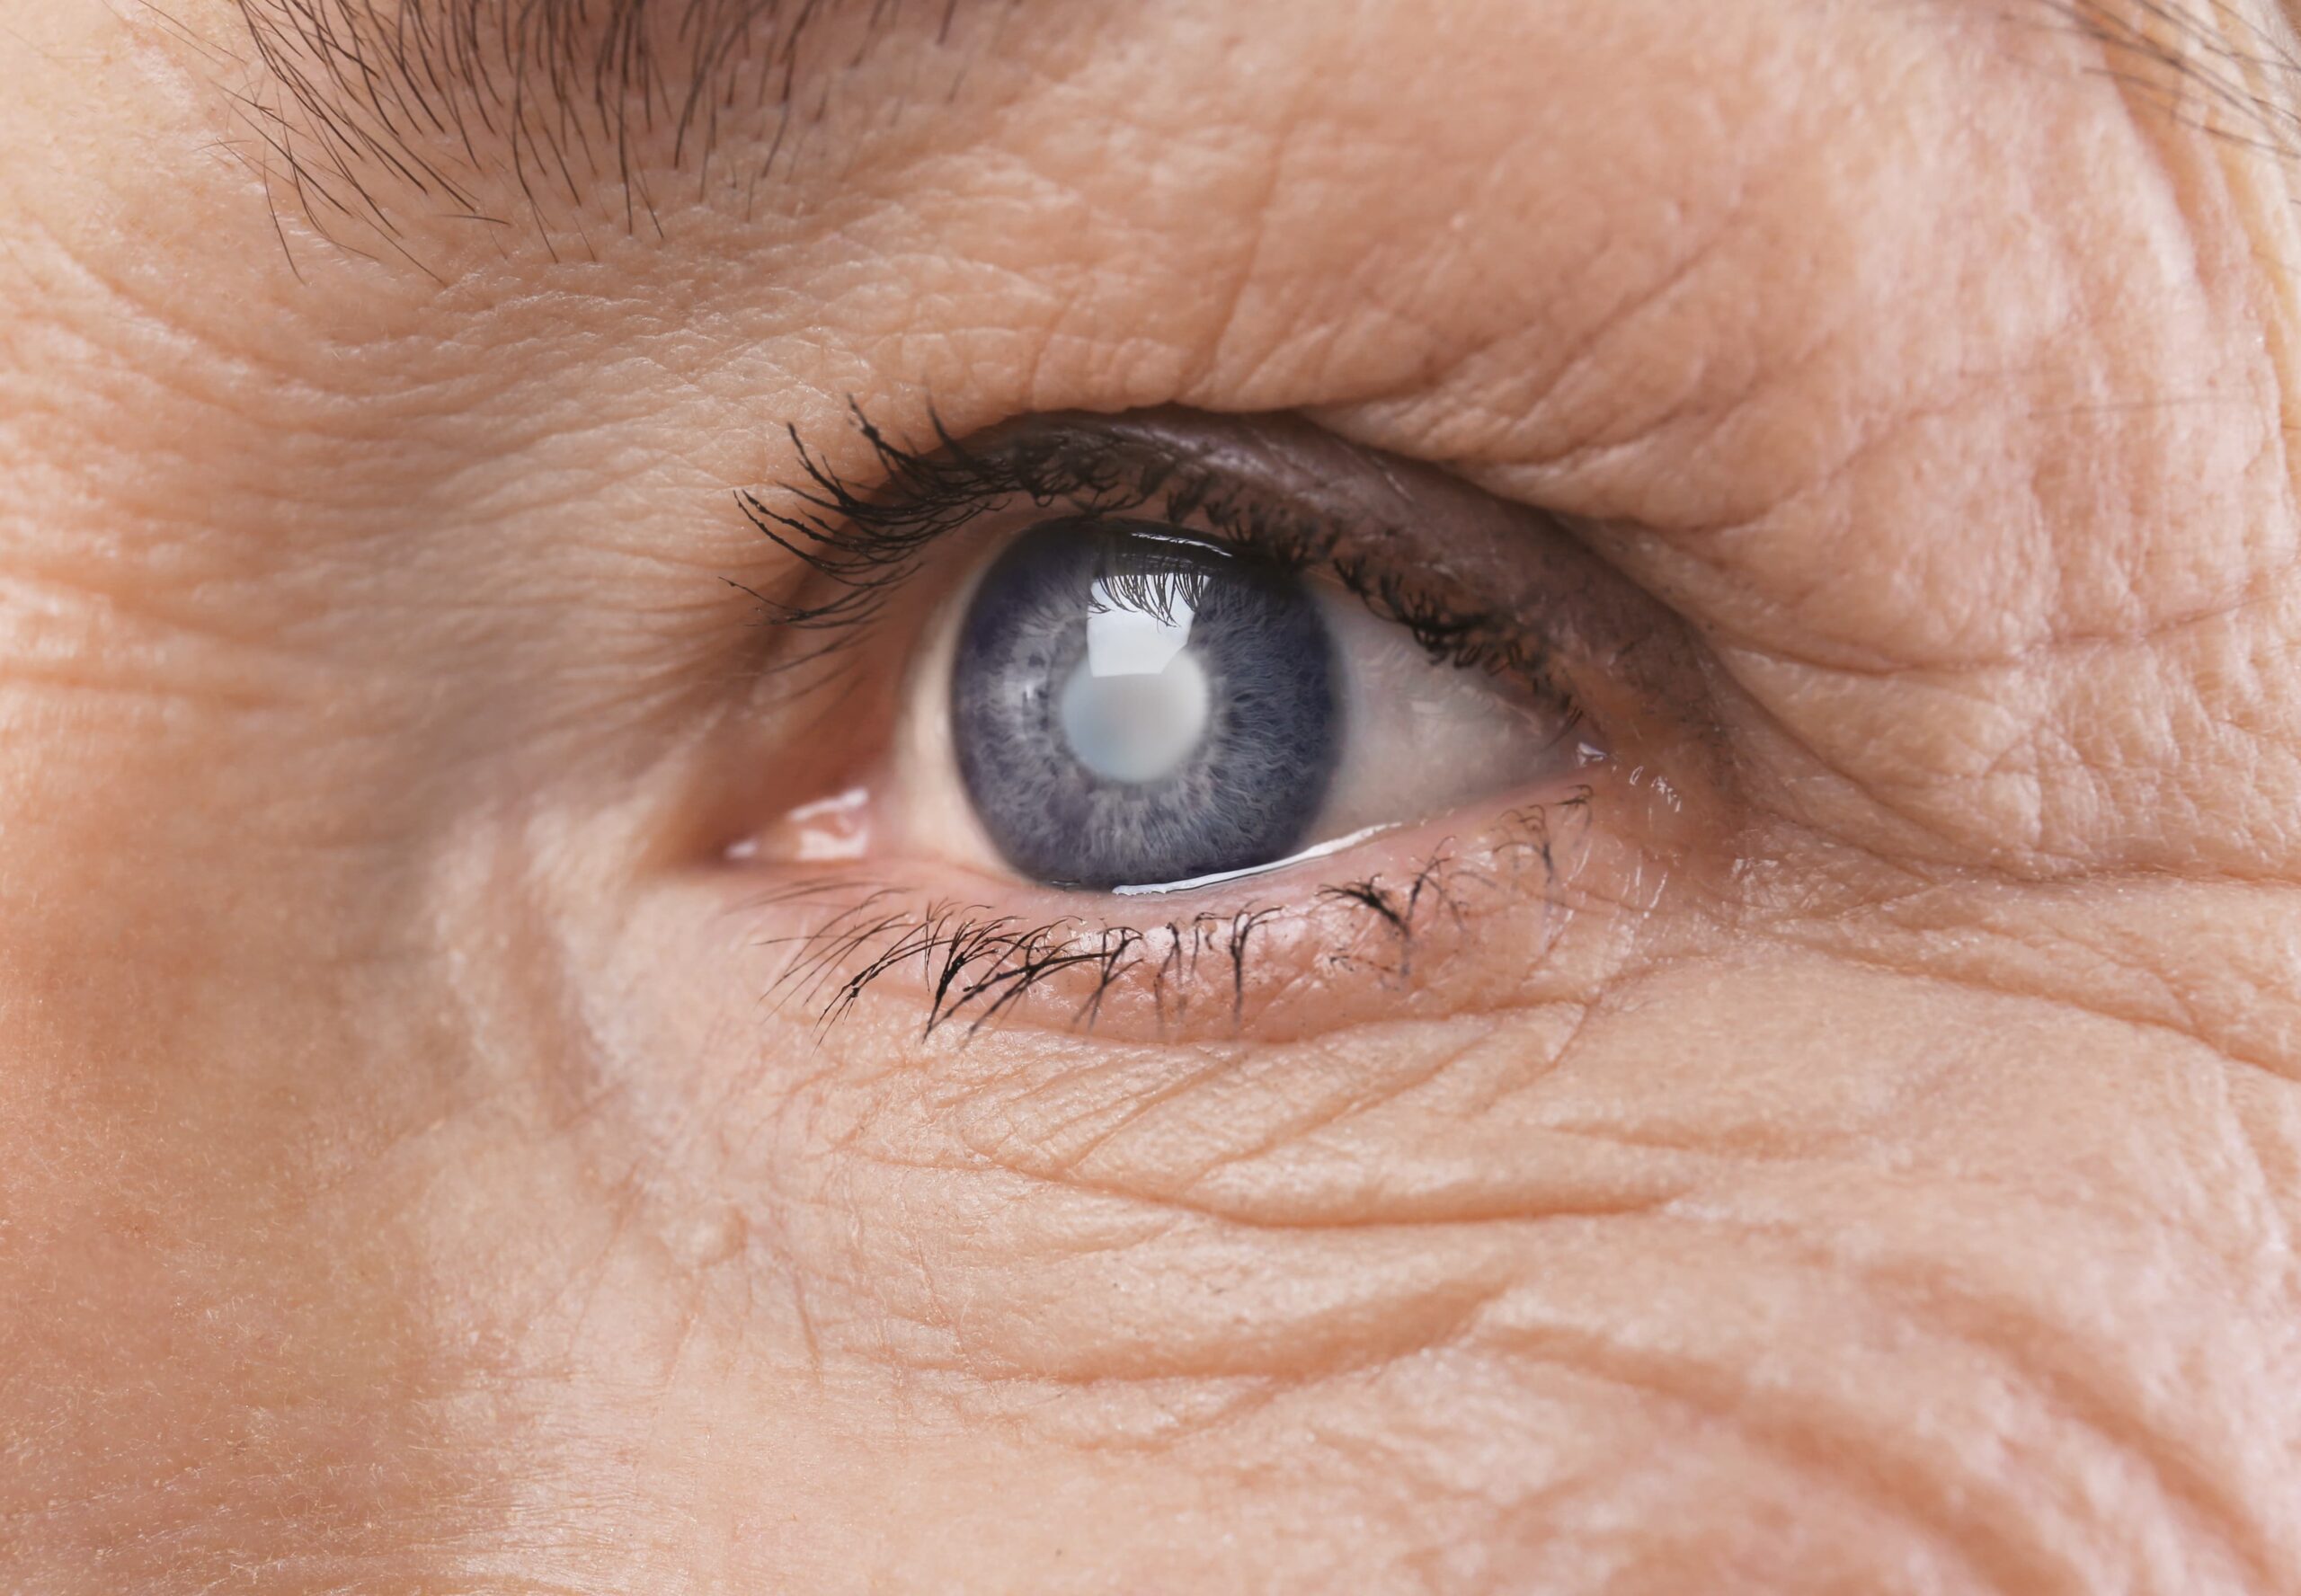 LenSx Cataract Surgery in Reno for the removal of cataracts